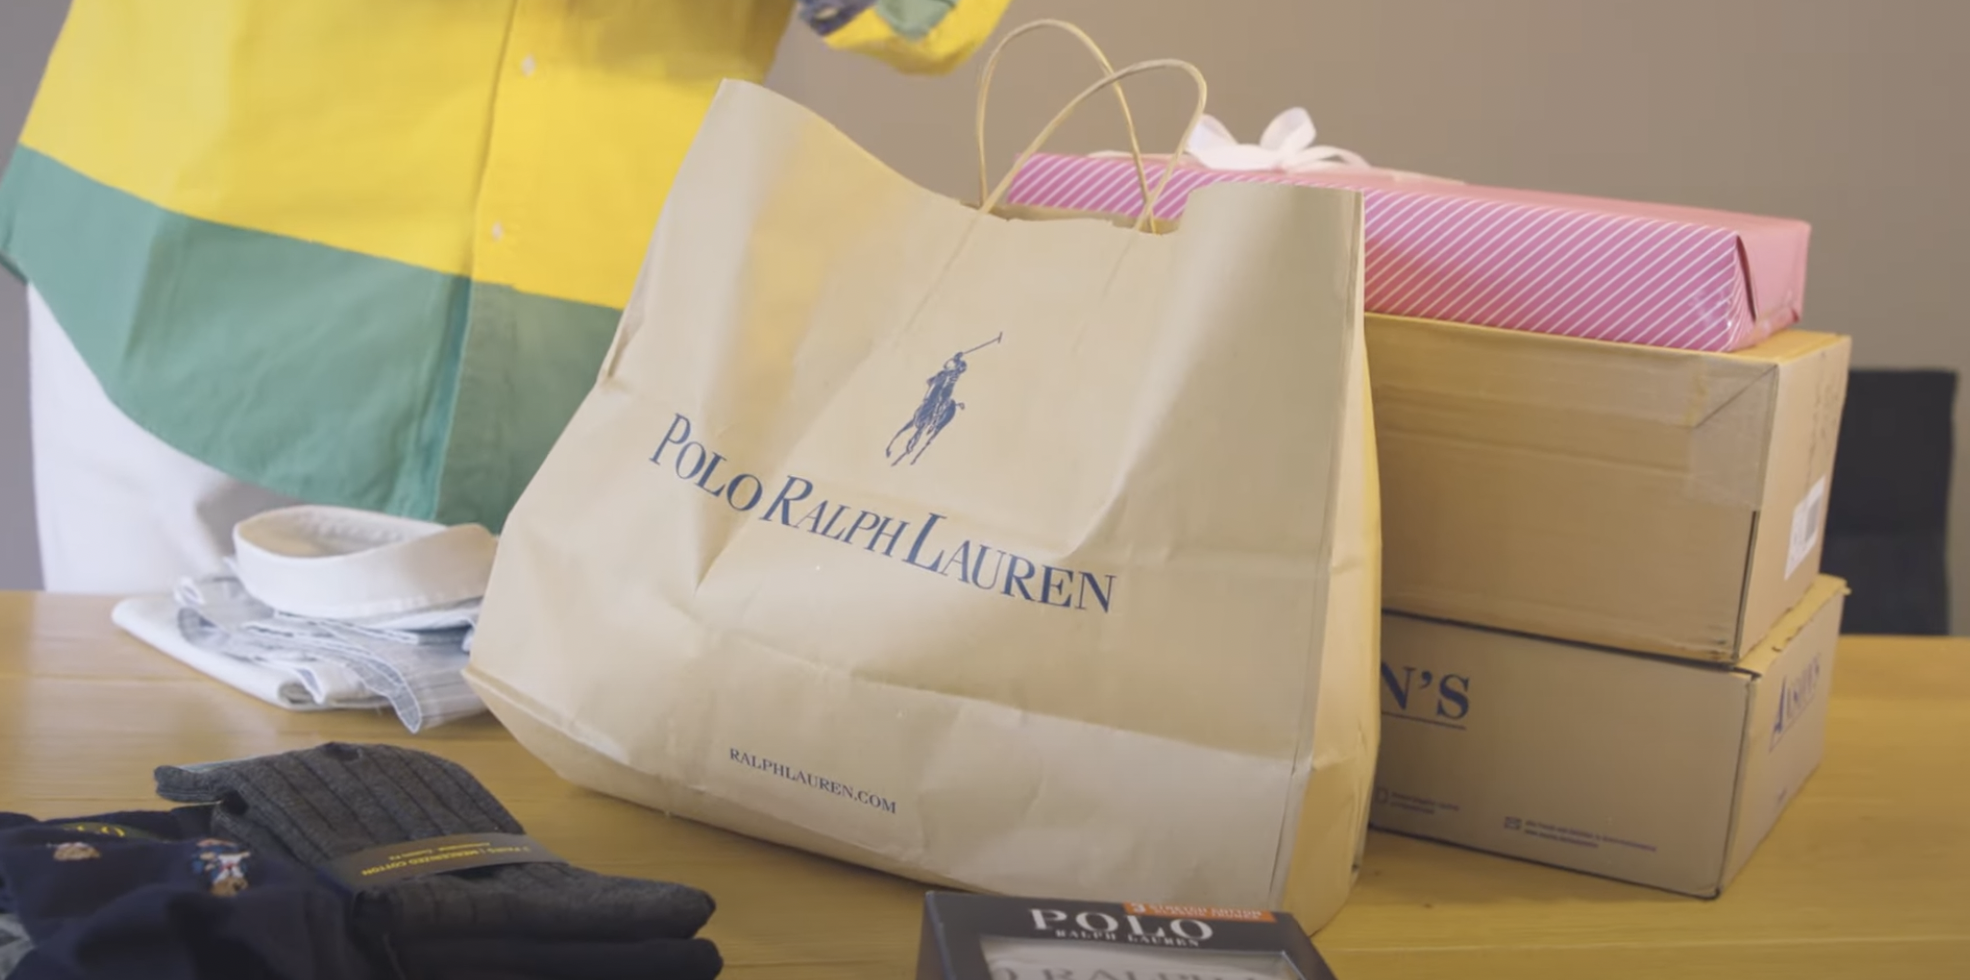 polo ralph lauren return policy-unboxing-shopping-man-clothing